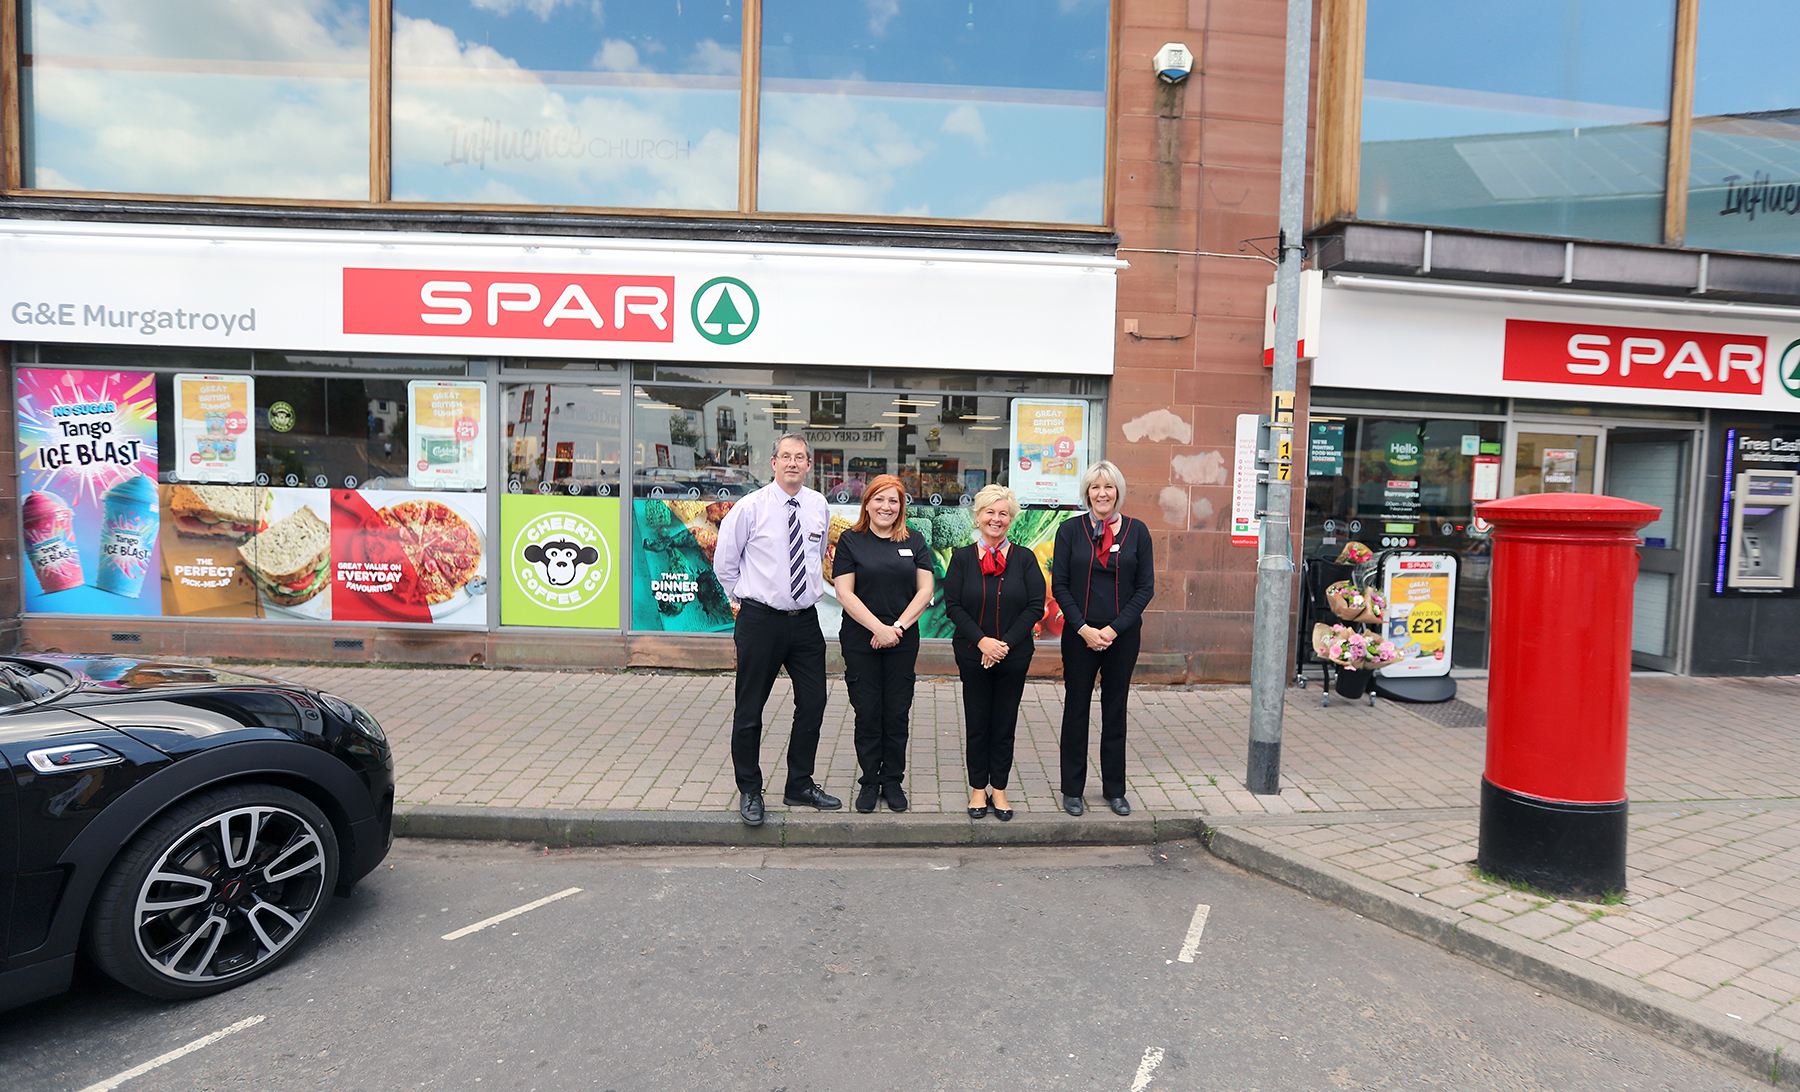 New SPAR shopping experience comes to Penrith with transformed town centre store